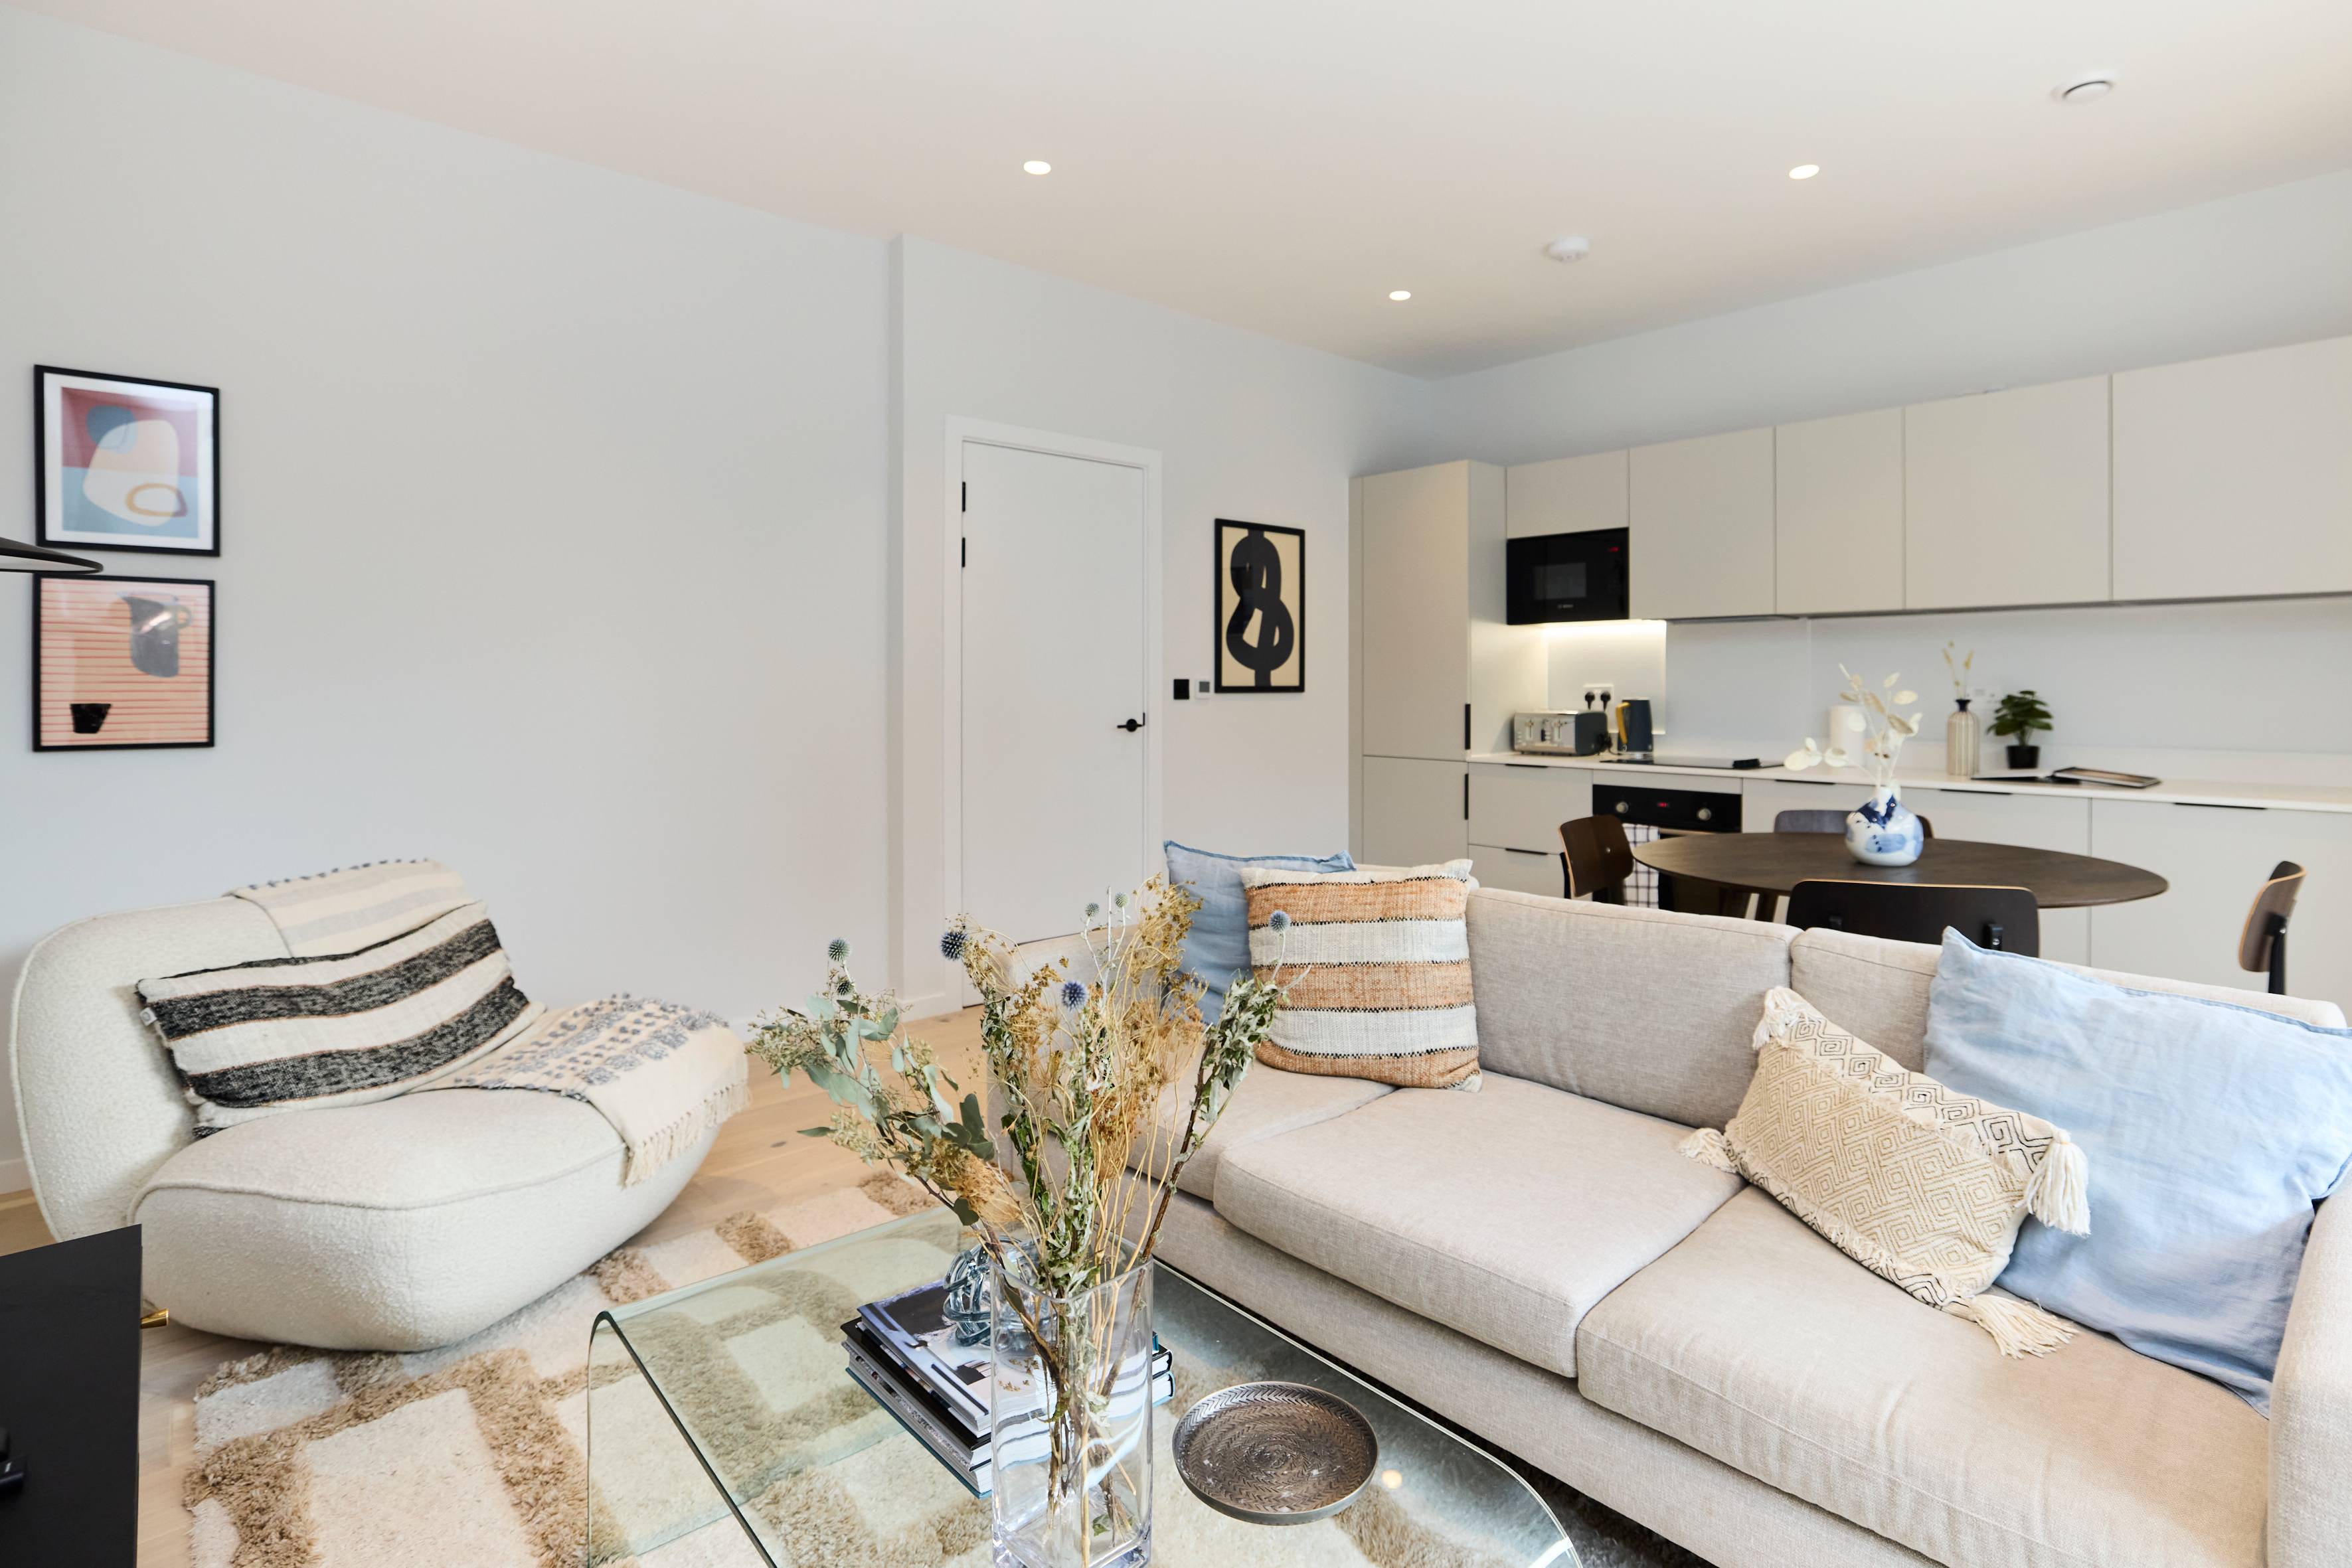 Step into Luxury with this Brand-New Two-Bedroom Flat with a Large Terrace in Vibrant Kilburn